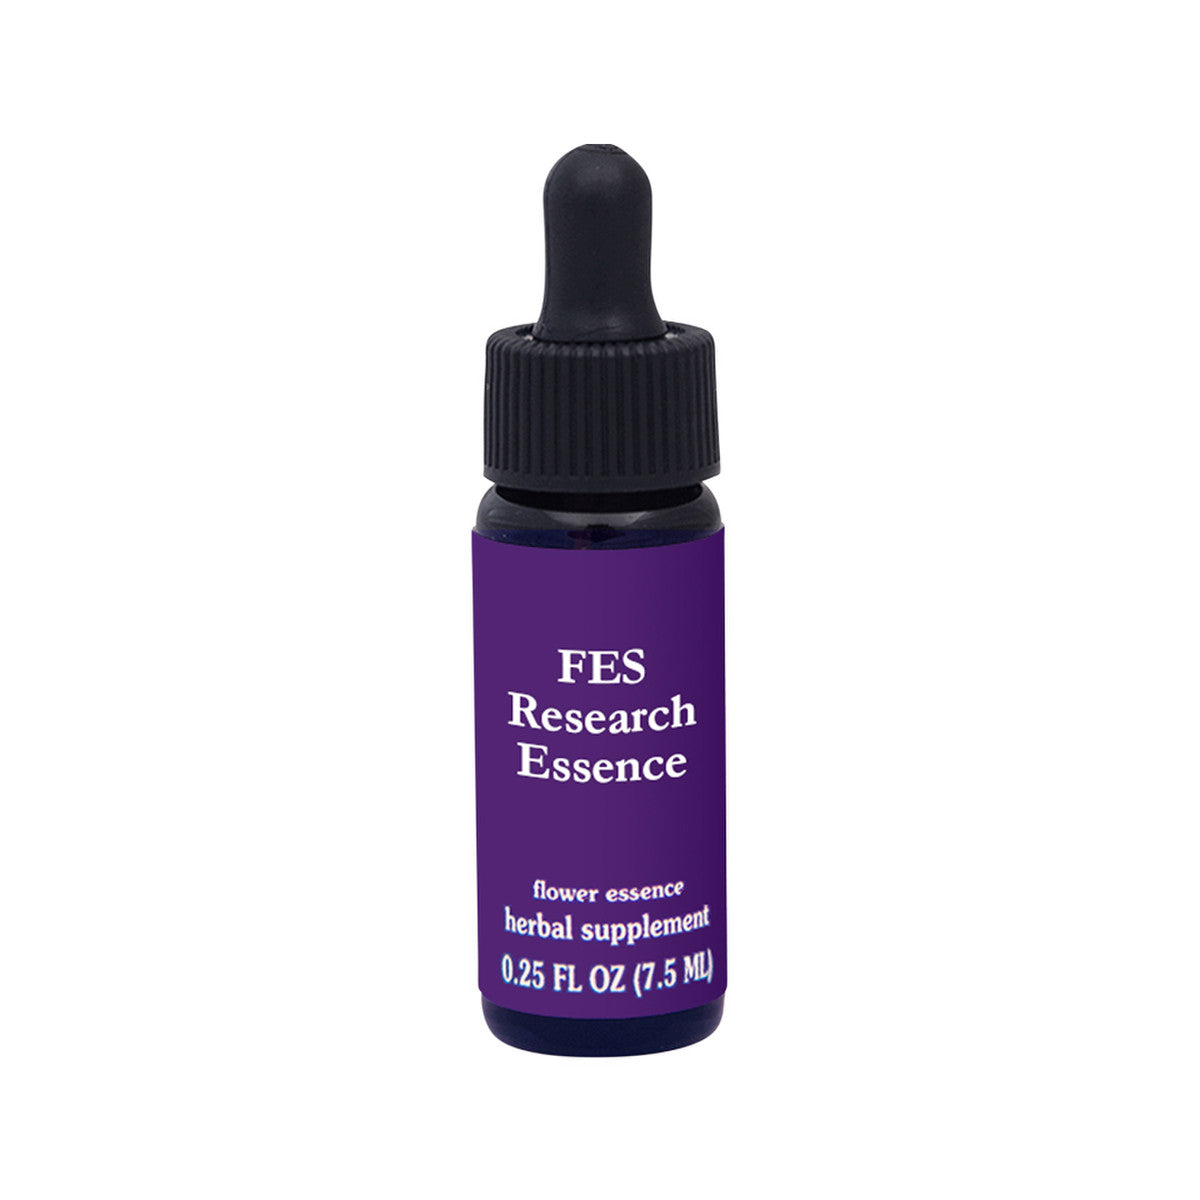 FES Organic Research Flower Essence Mimulus 7.5ml